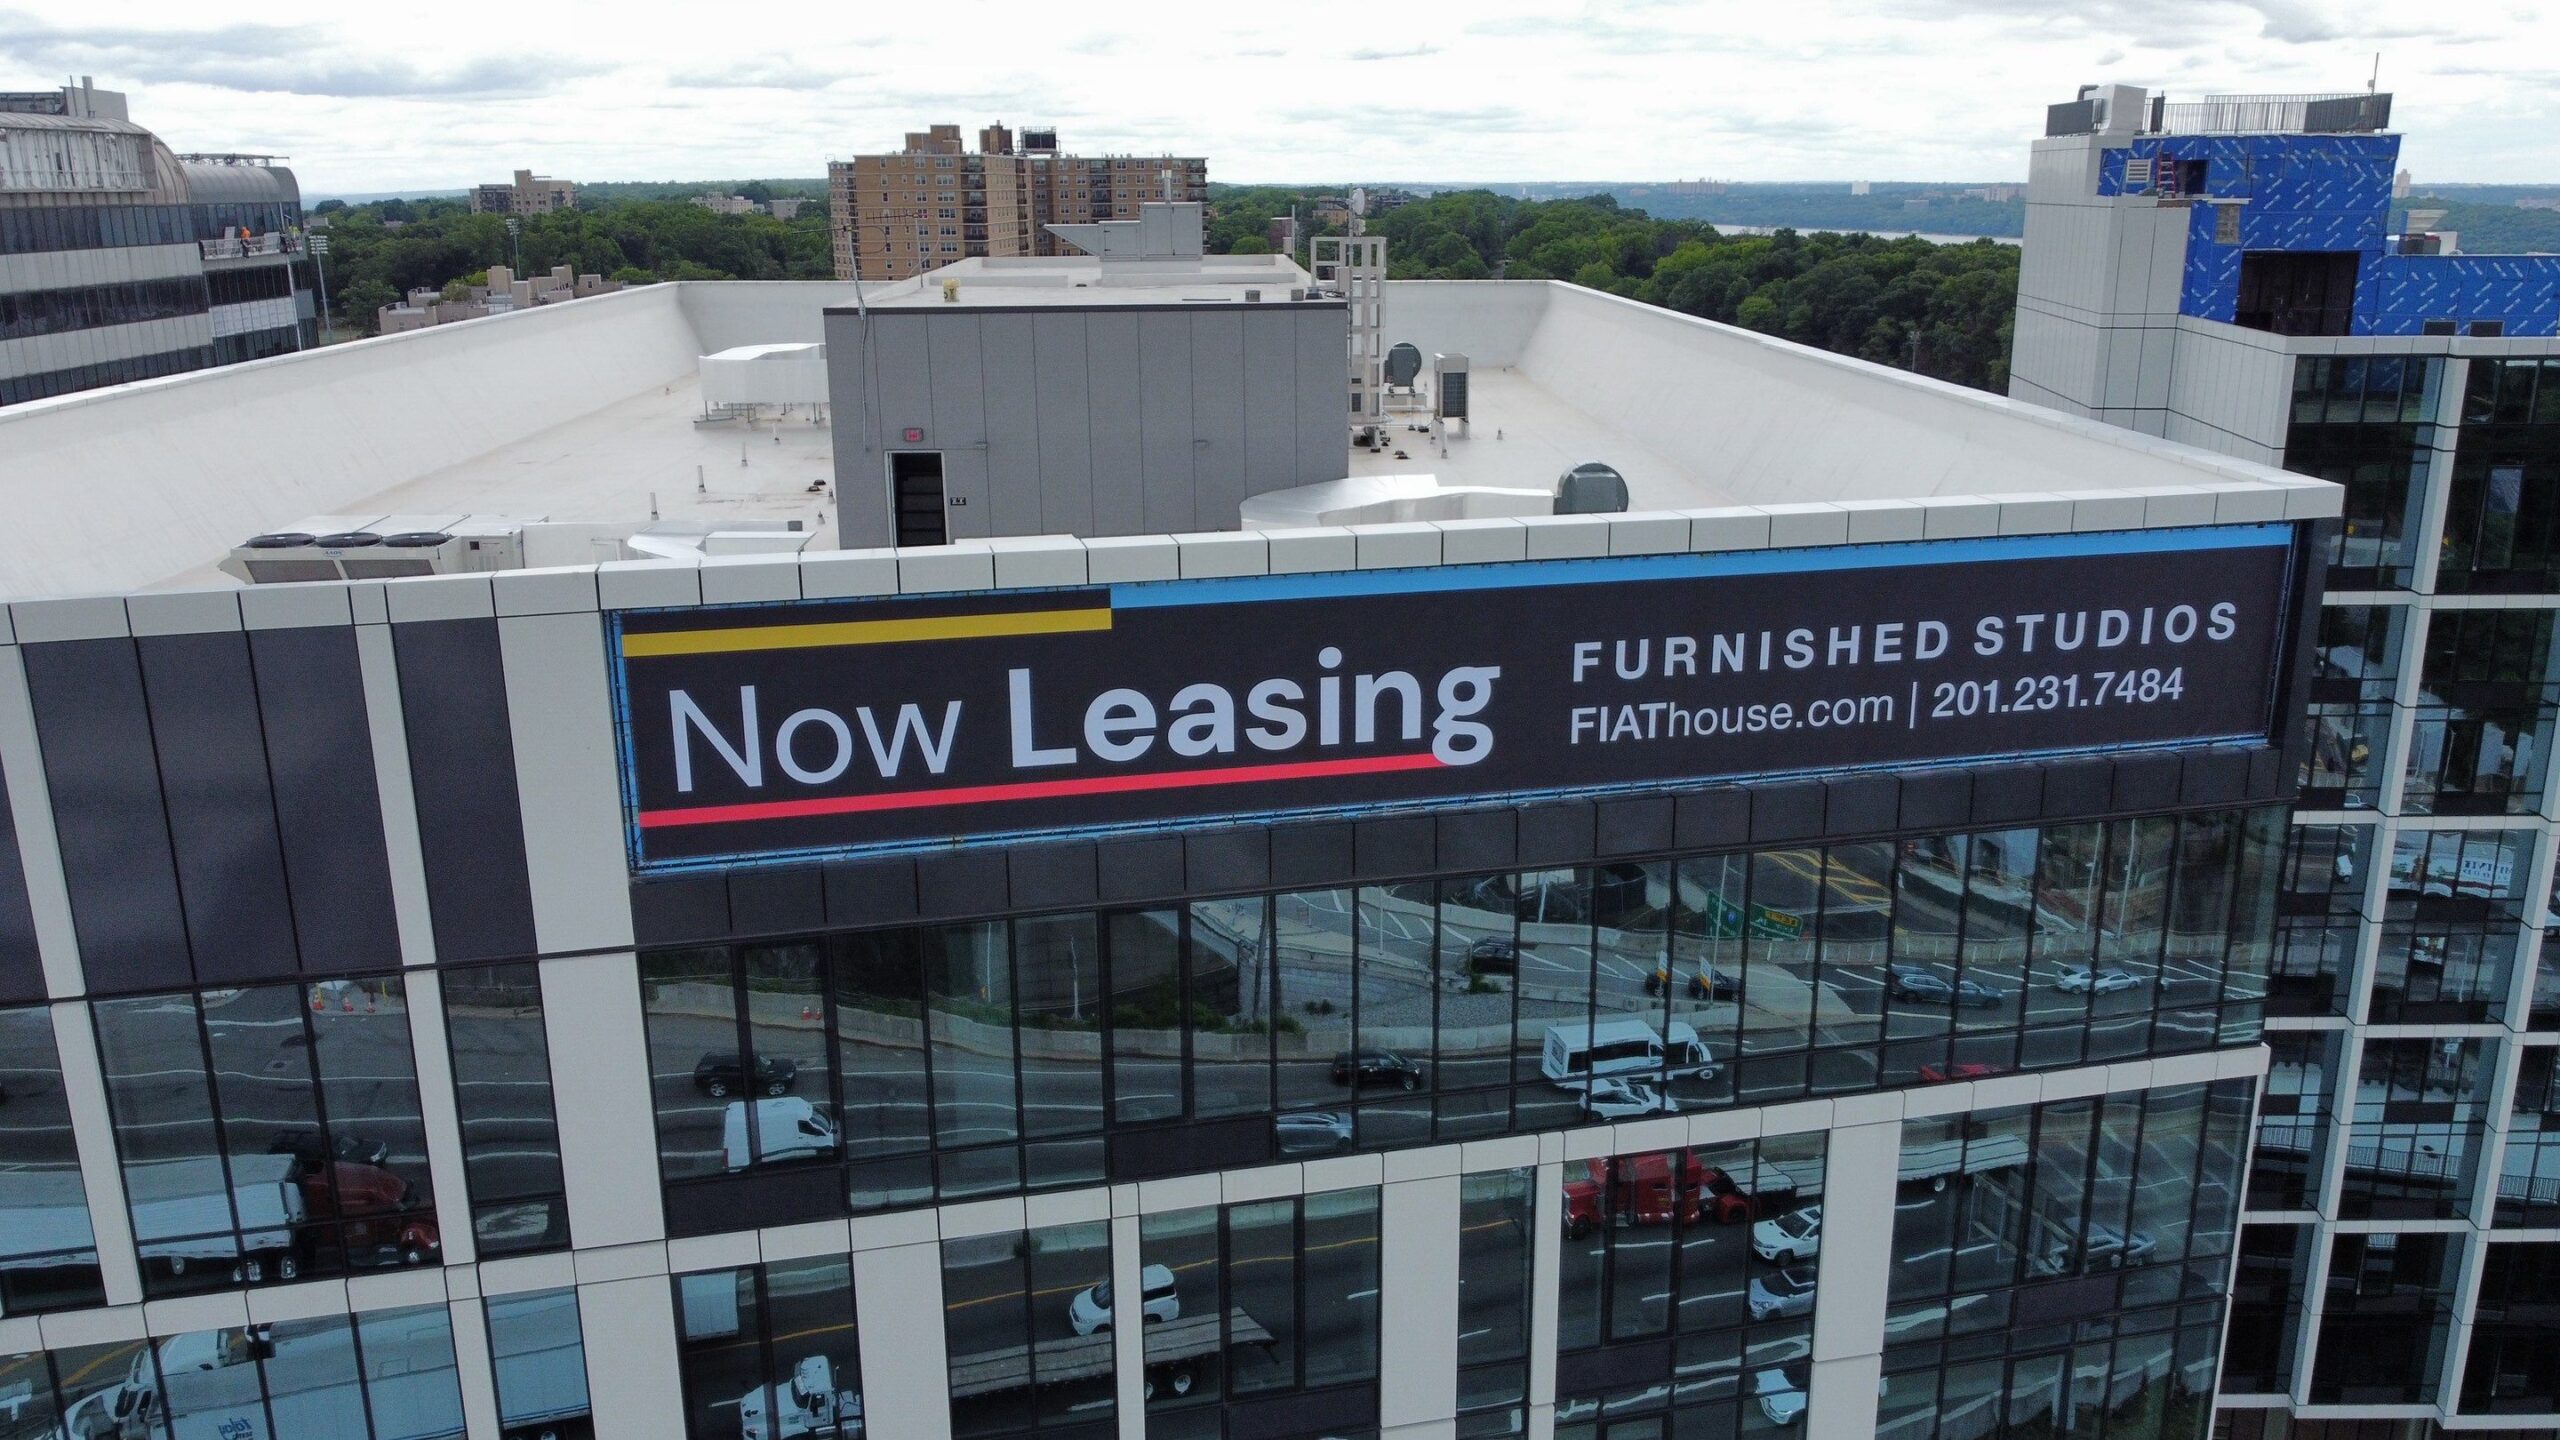 Now Leasing Banner